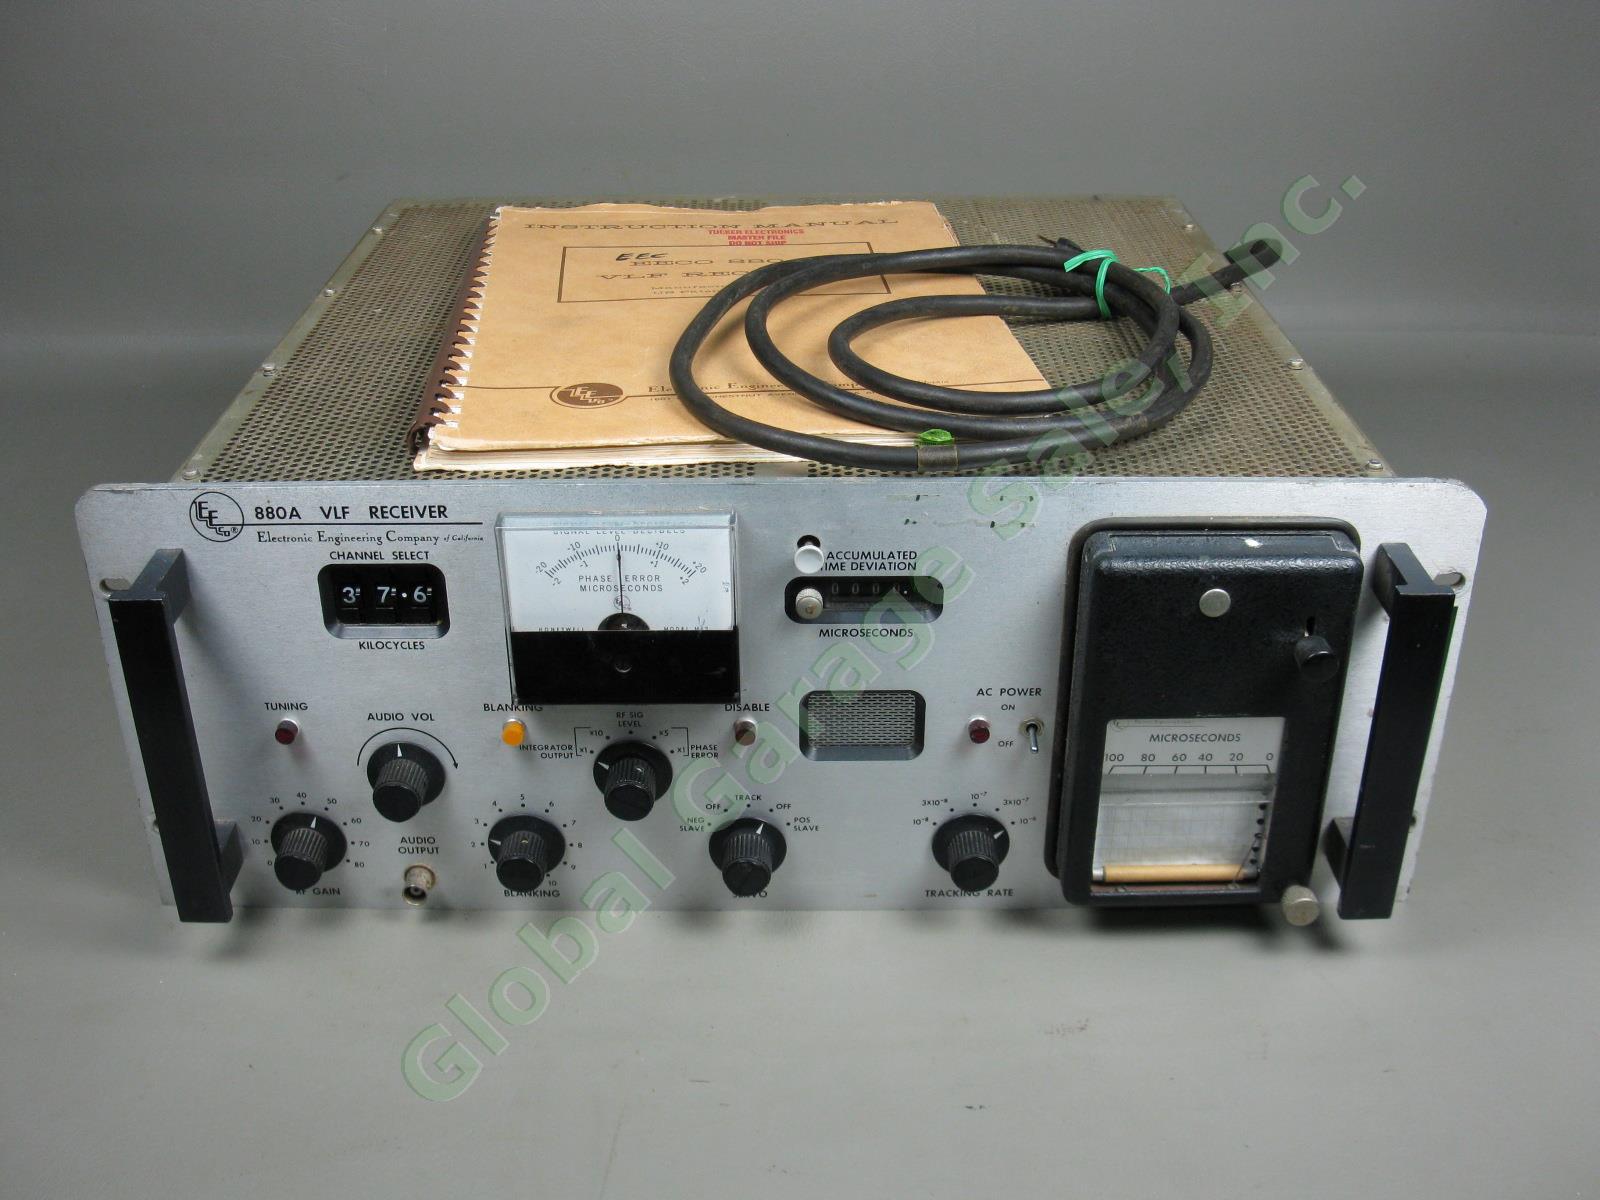 Vtg EEC Electronic Engineering Co EECO 880A VLF Receiver W/ Manual Not Tested NR